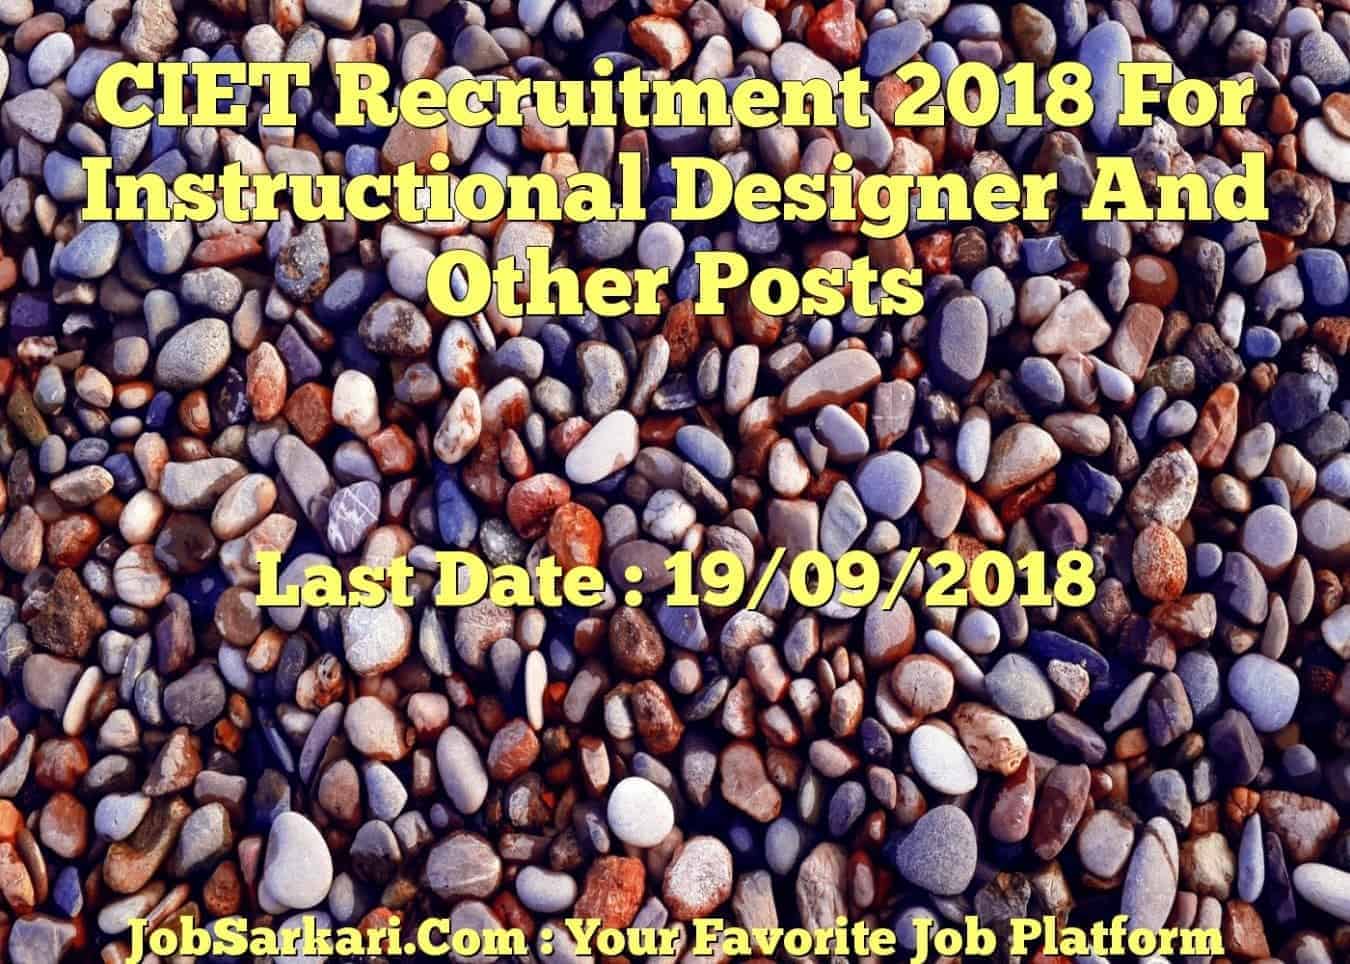 CIET Recruitment 2018 For Instructional Designer And Other Posts